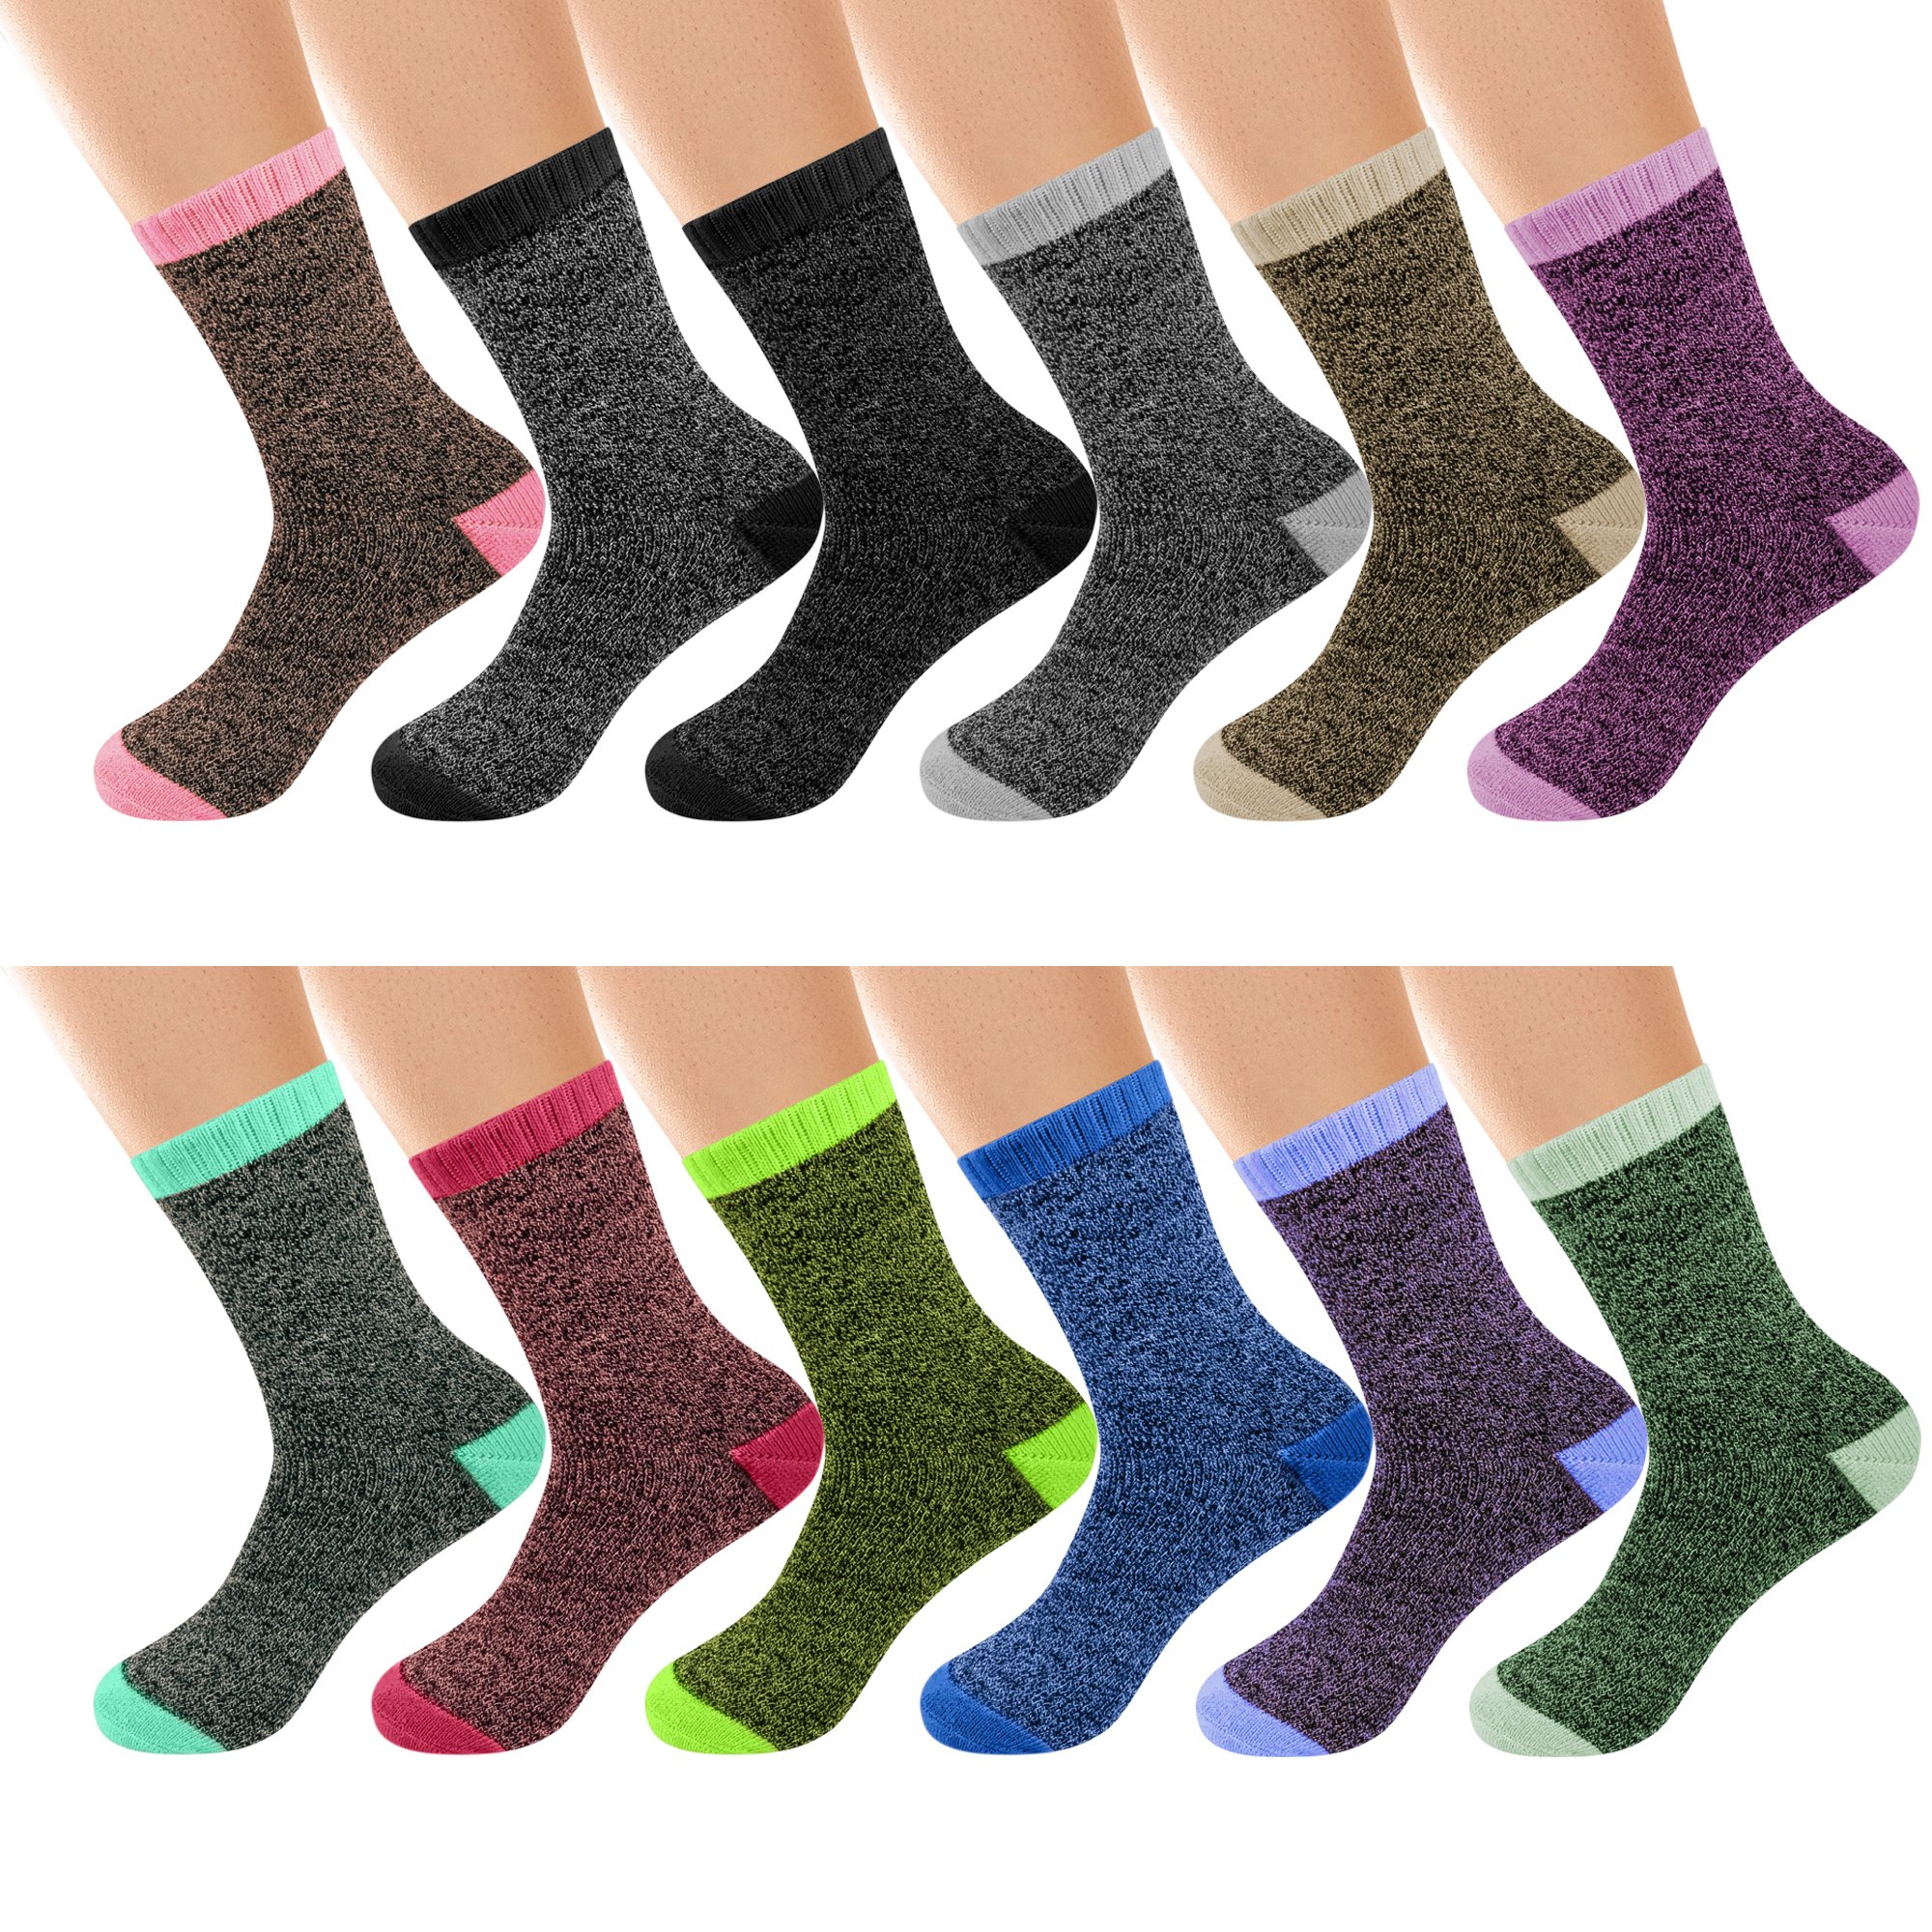 6-Pairs: Women's Warm Thick Cozy Soft Winter Boot Thermal Socks